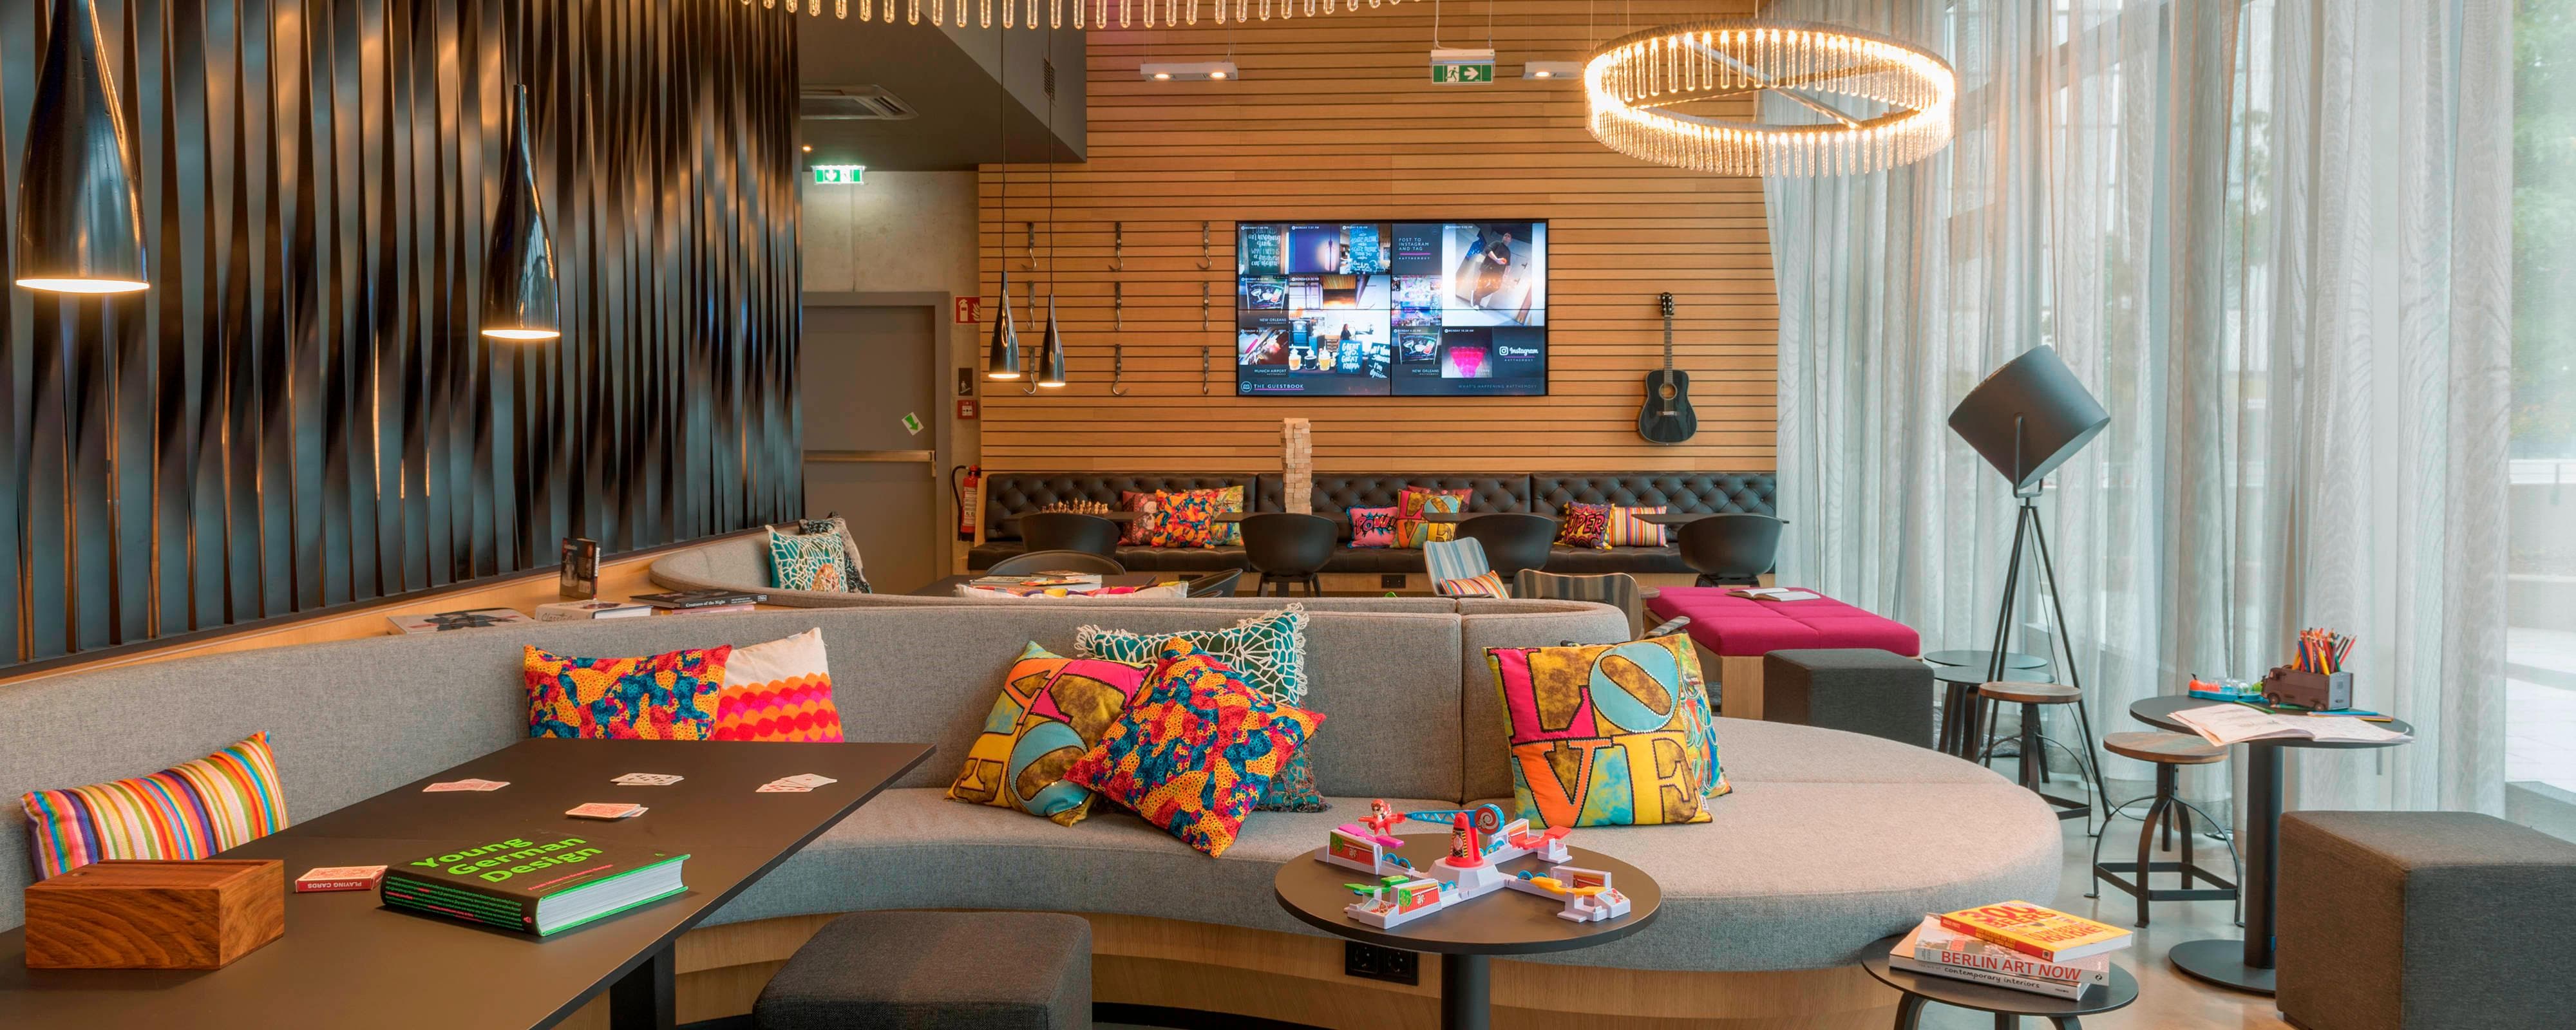 Image for Moxy Ludwigshafen, a Marriott hotel.